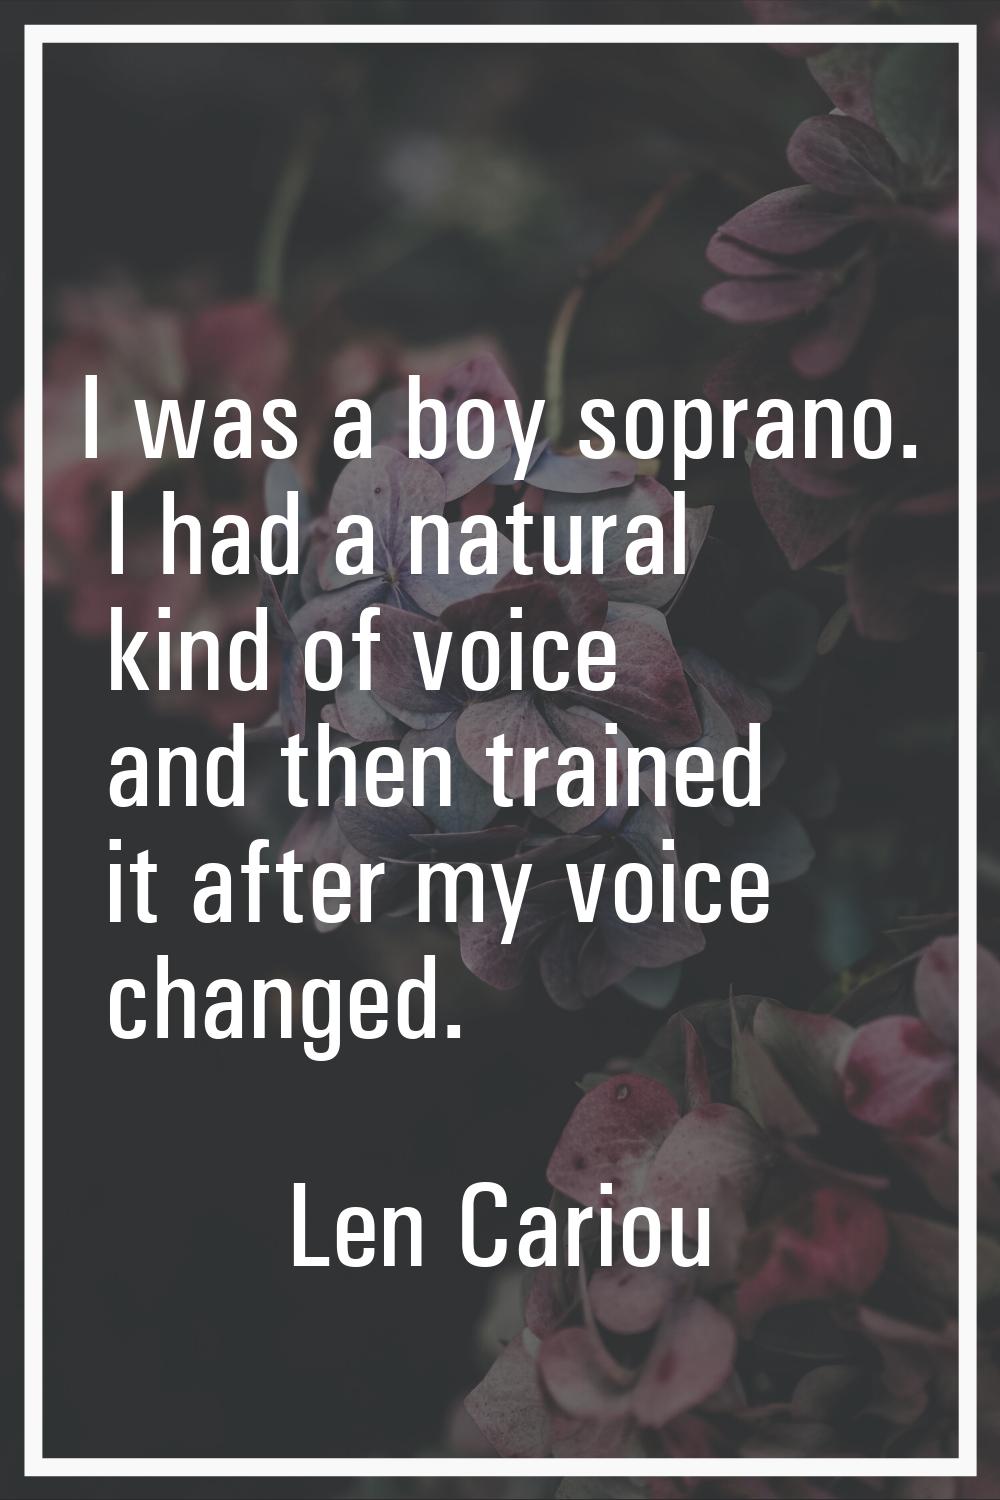 I was a boy soprano. I had a natural kind of voice and then trained it after my voice changed.